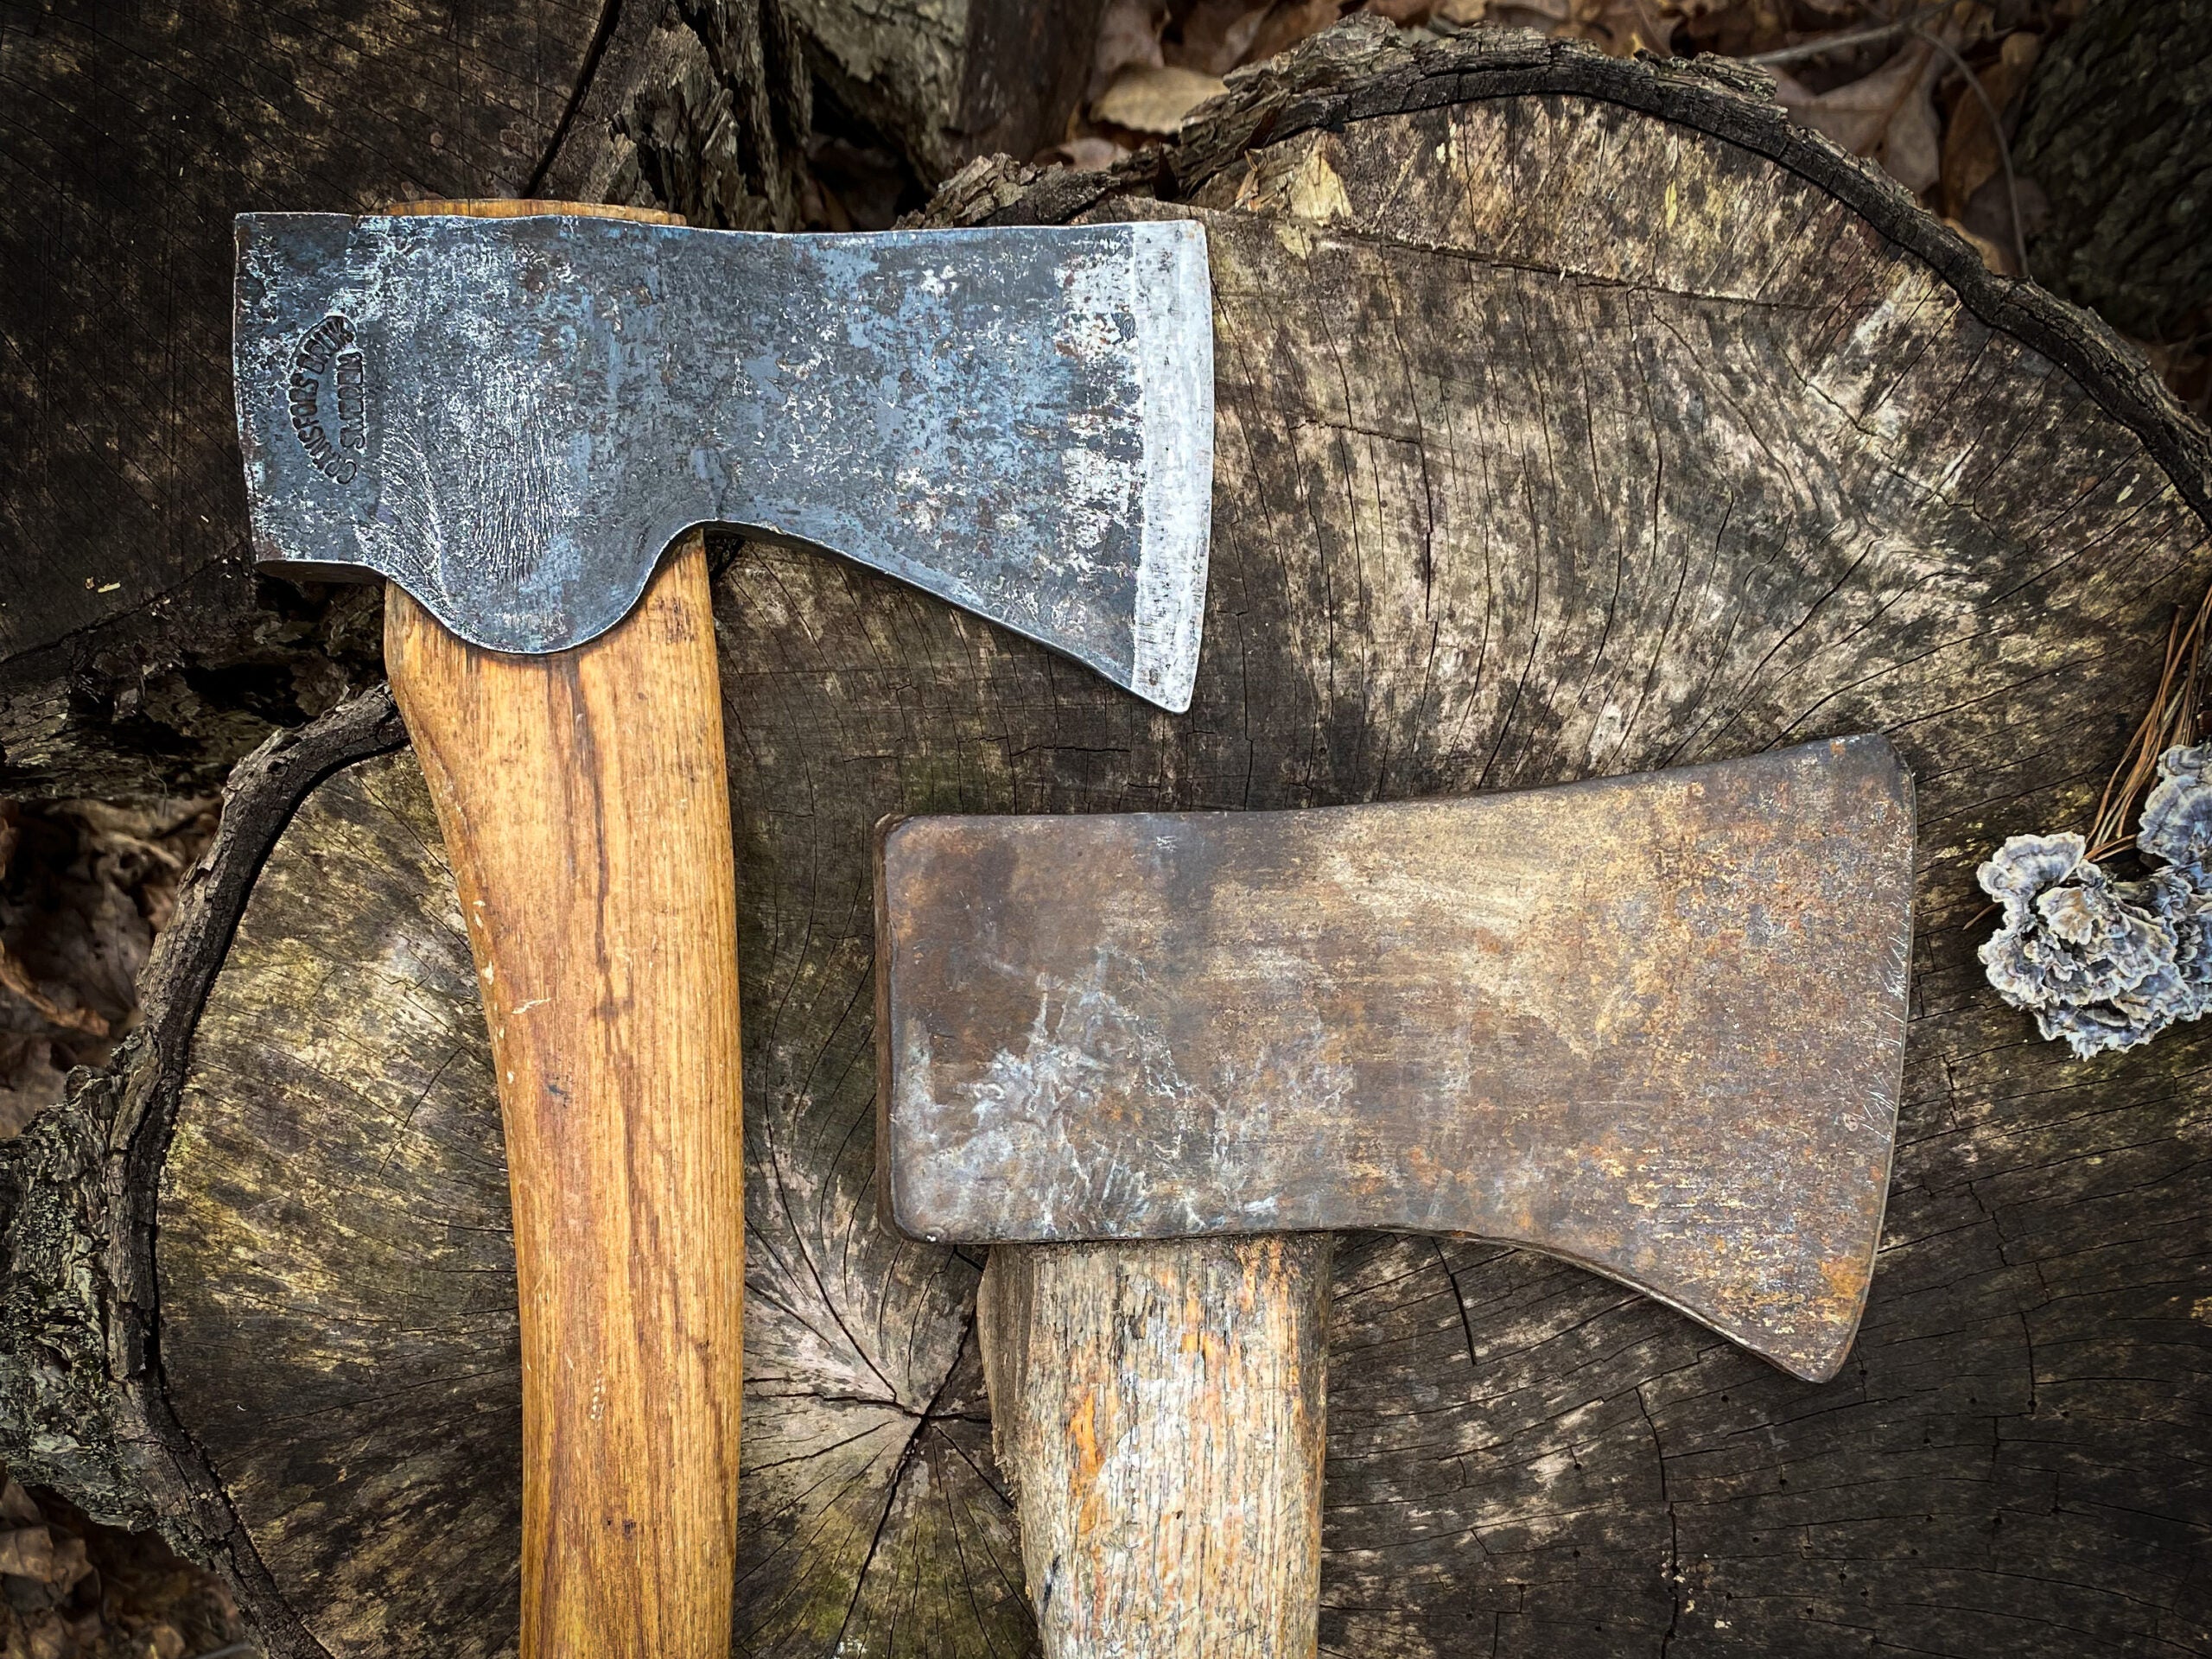 How to Sharpen an Axe - This Old House